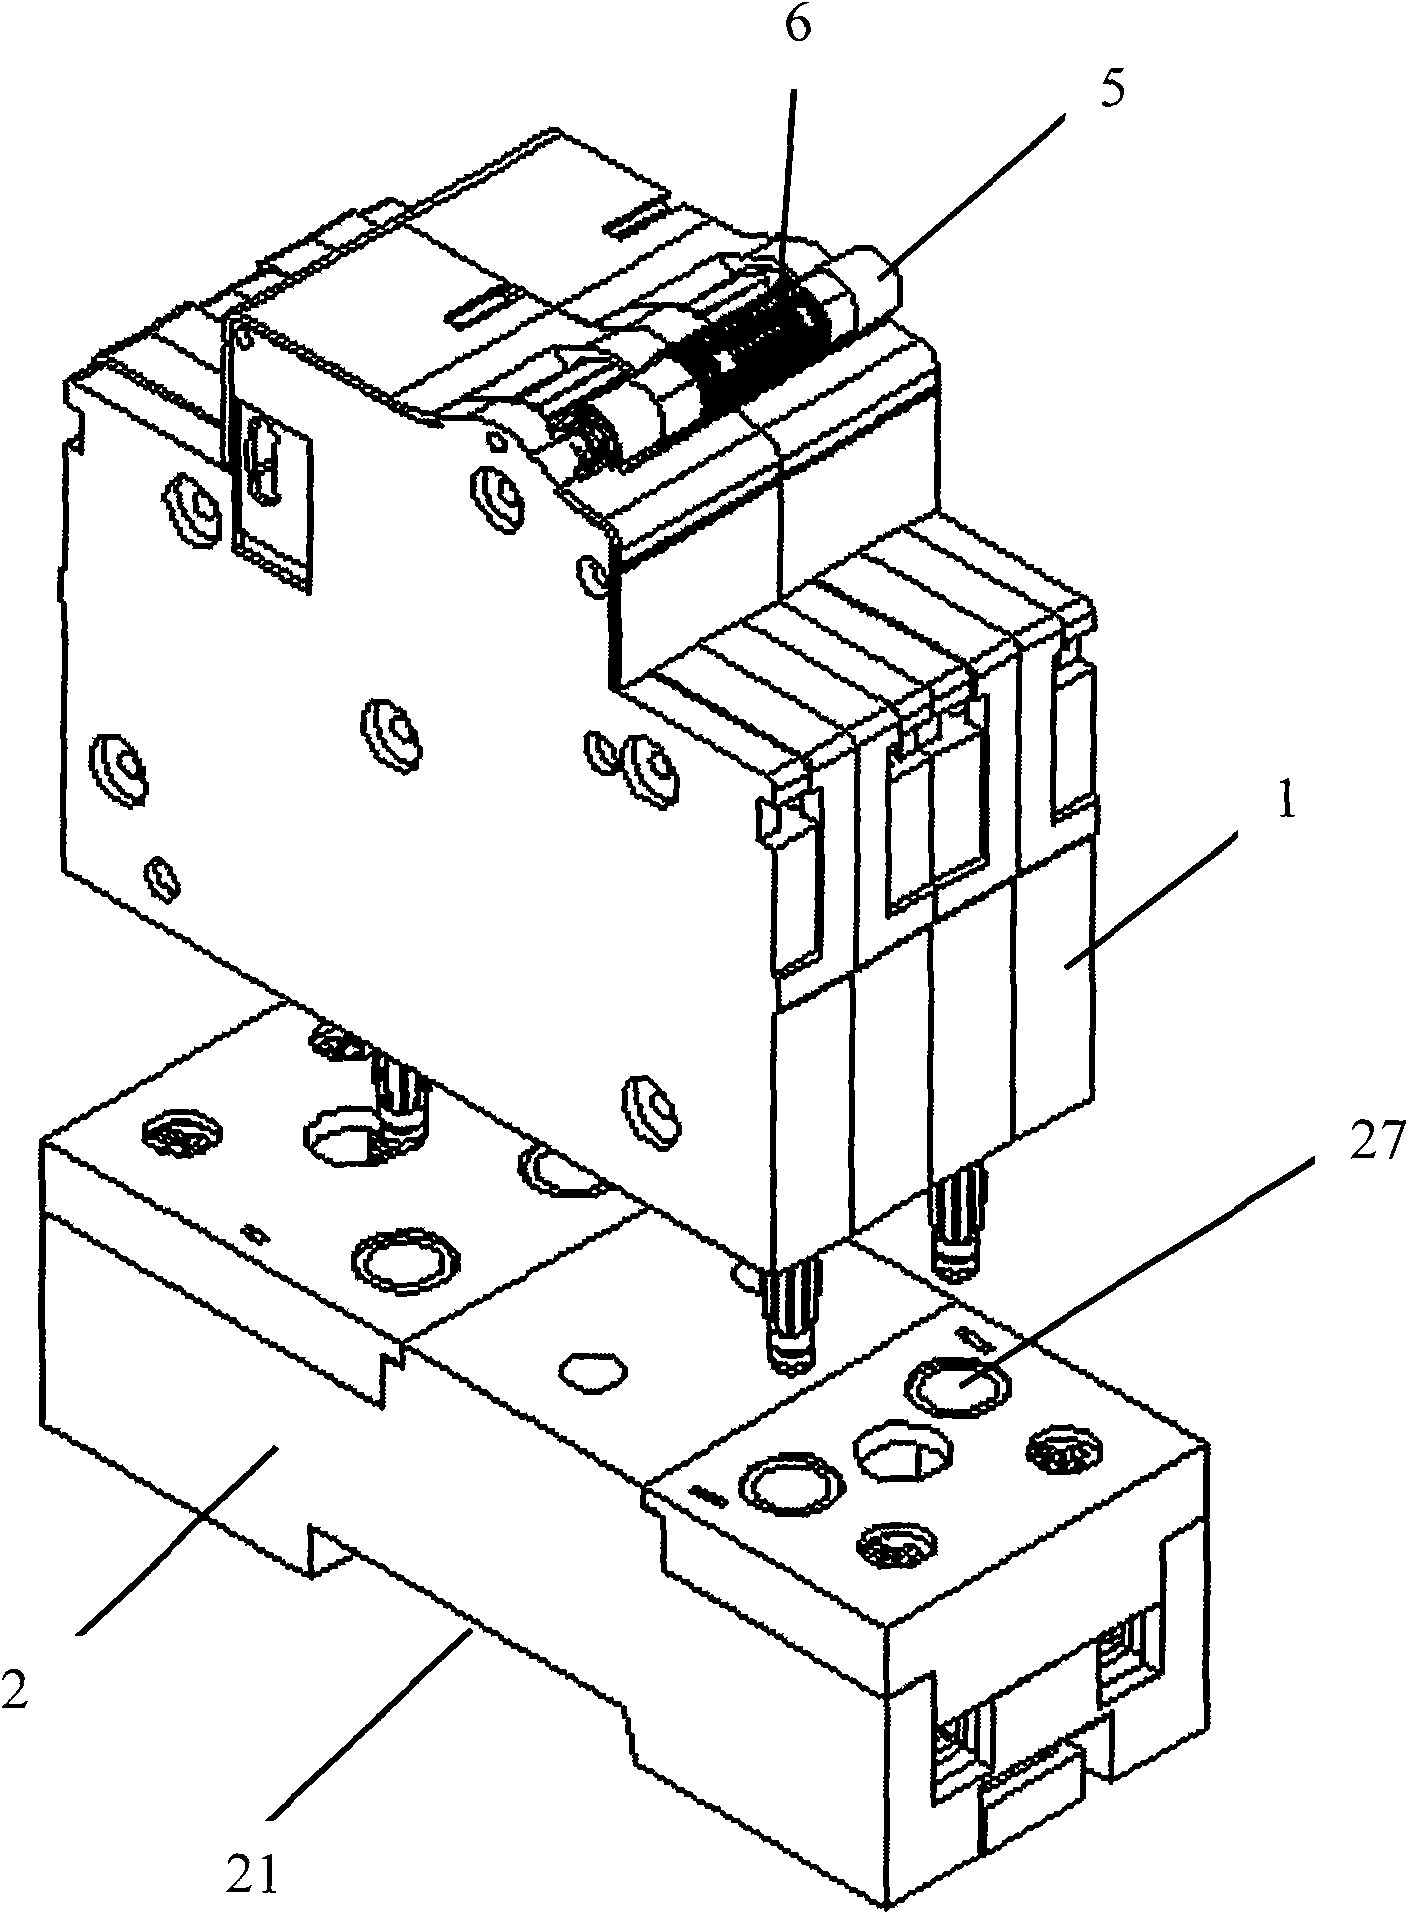 Small circuit breaker for plug-in installation